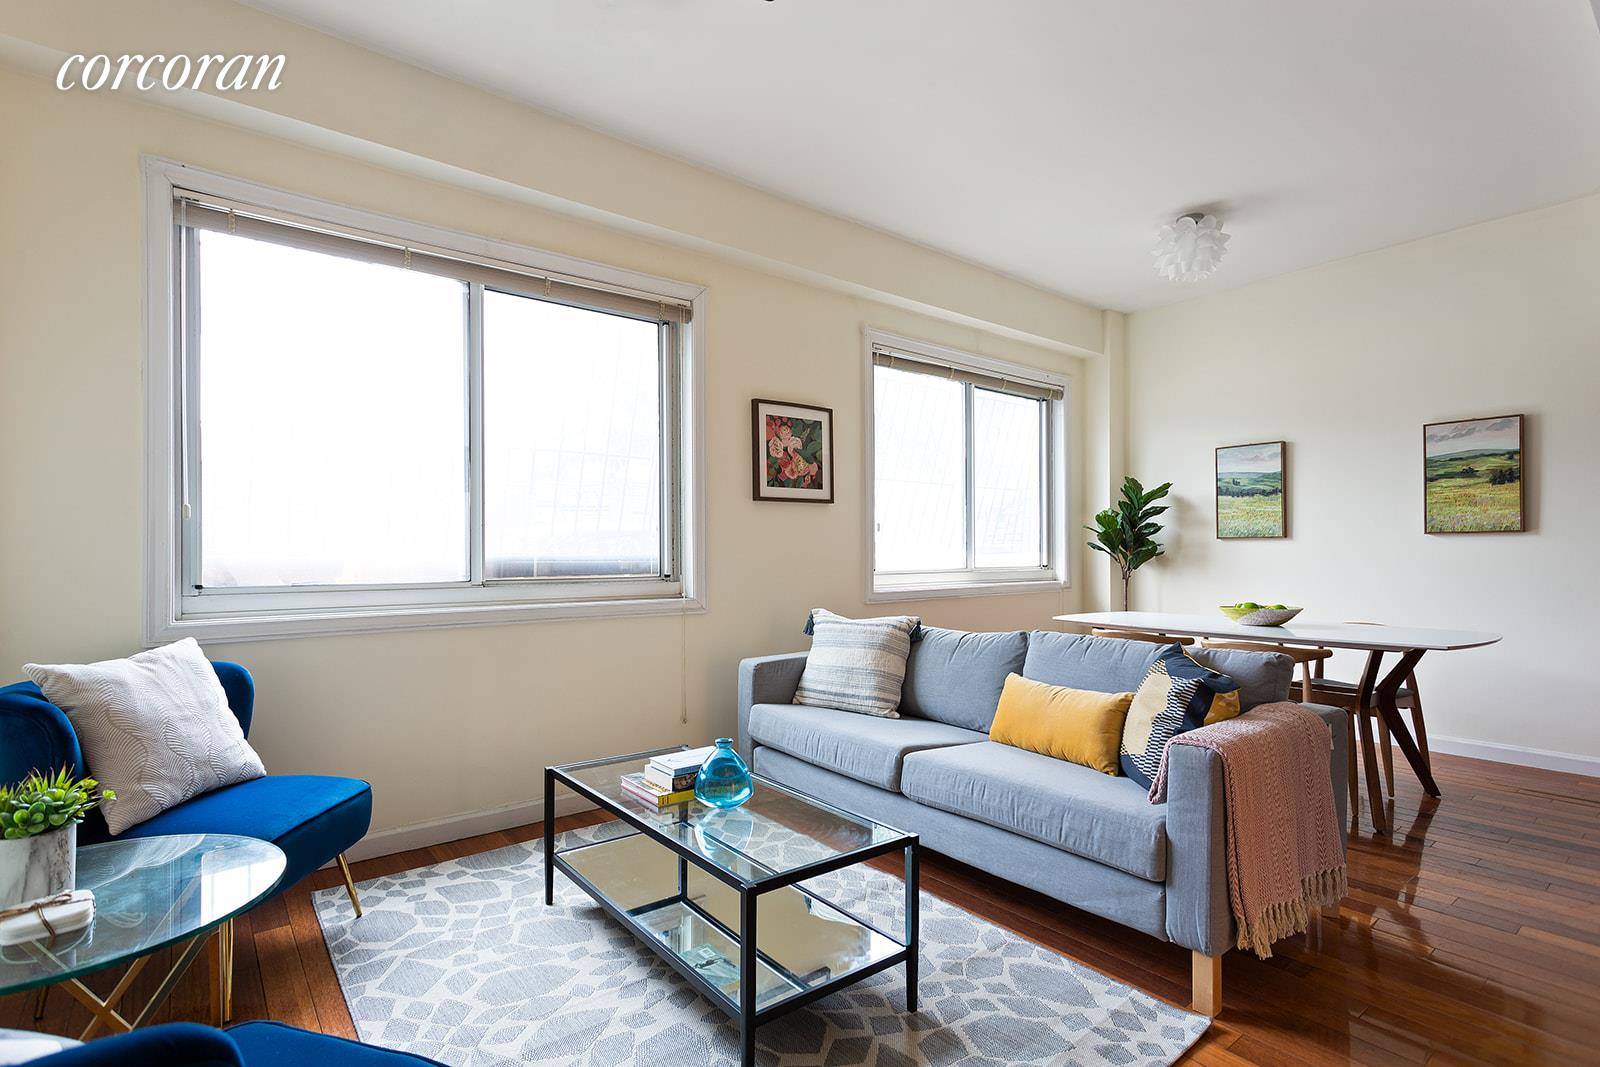 Welcome home to this light filled modern condo on the border of vibrant Park Slope and peaceful Greenwood Heights.